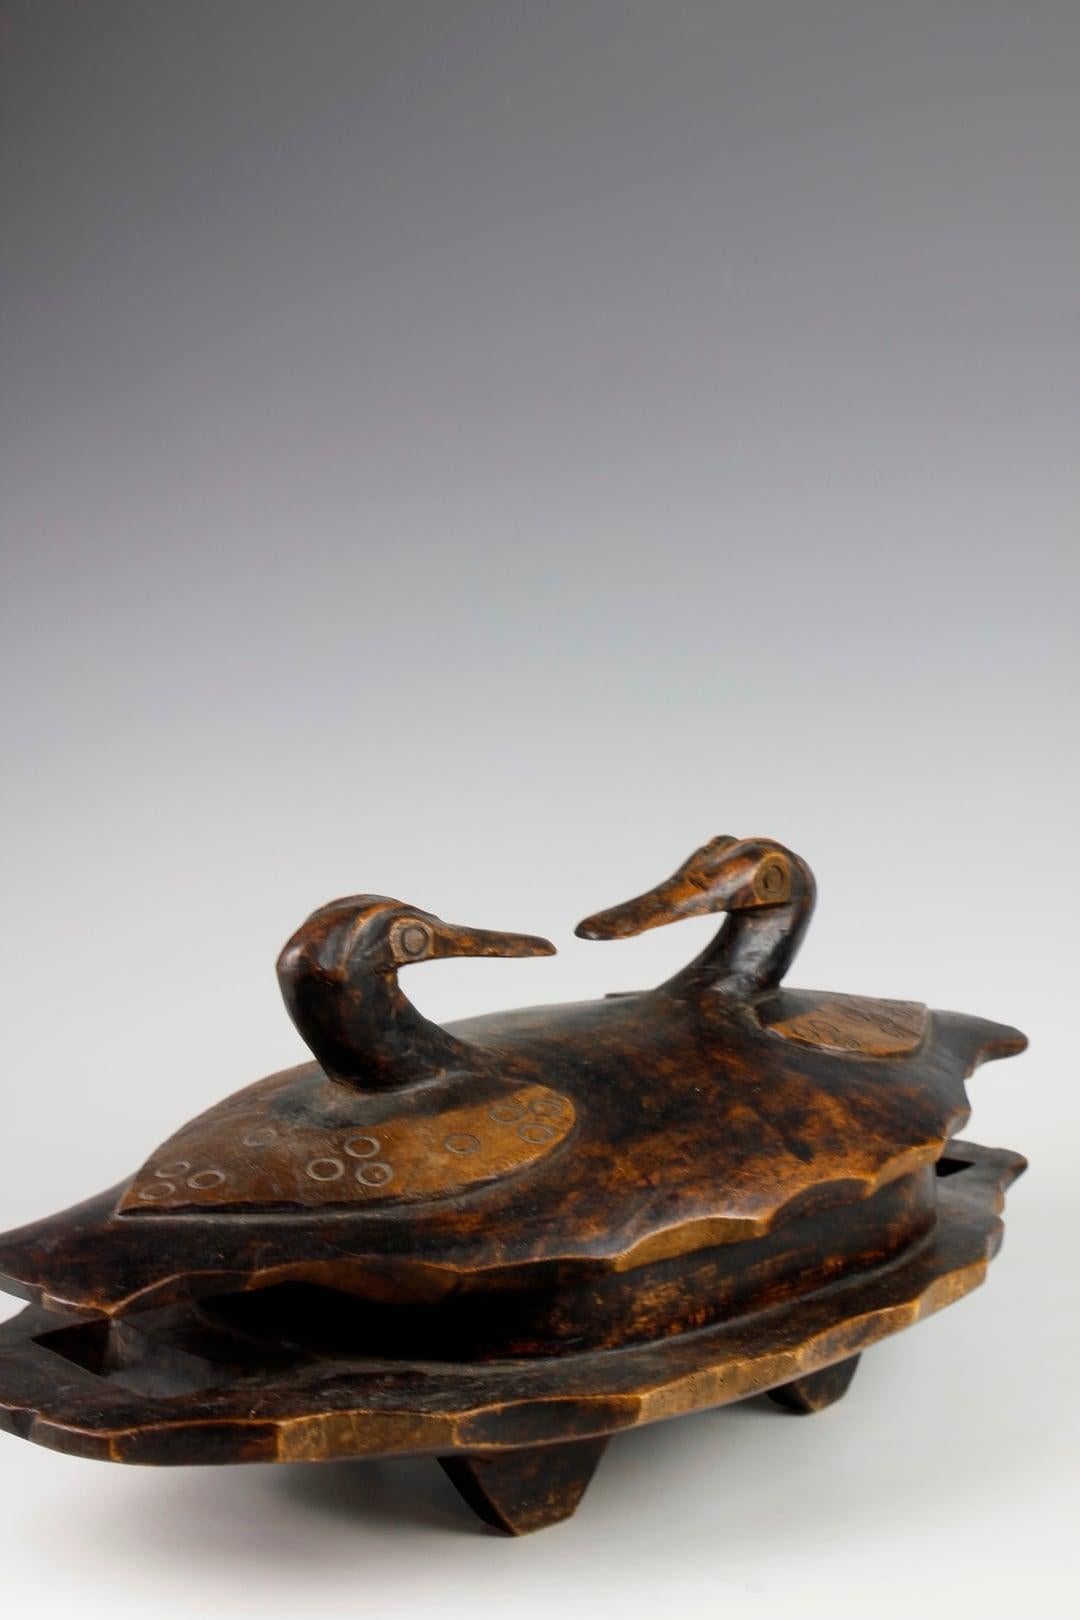 Tribal Mid-Twentieth Century Finely Carved Food Bowl Depicting Two Ducks For Sale